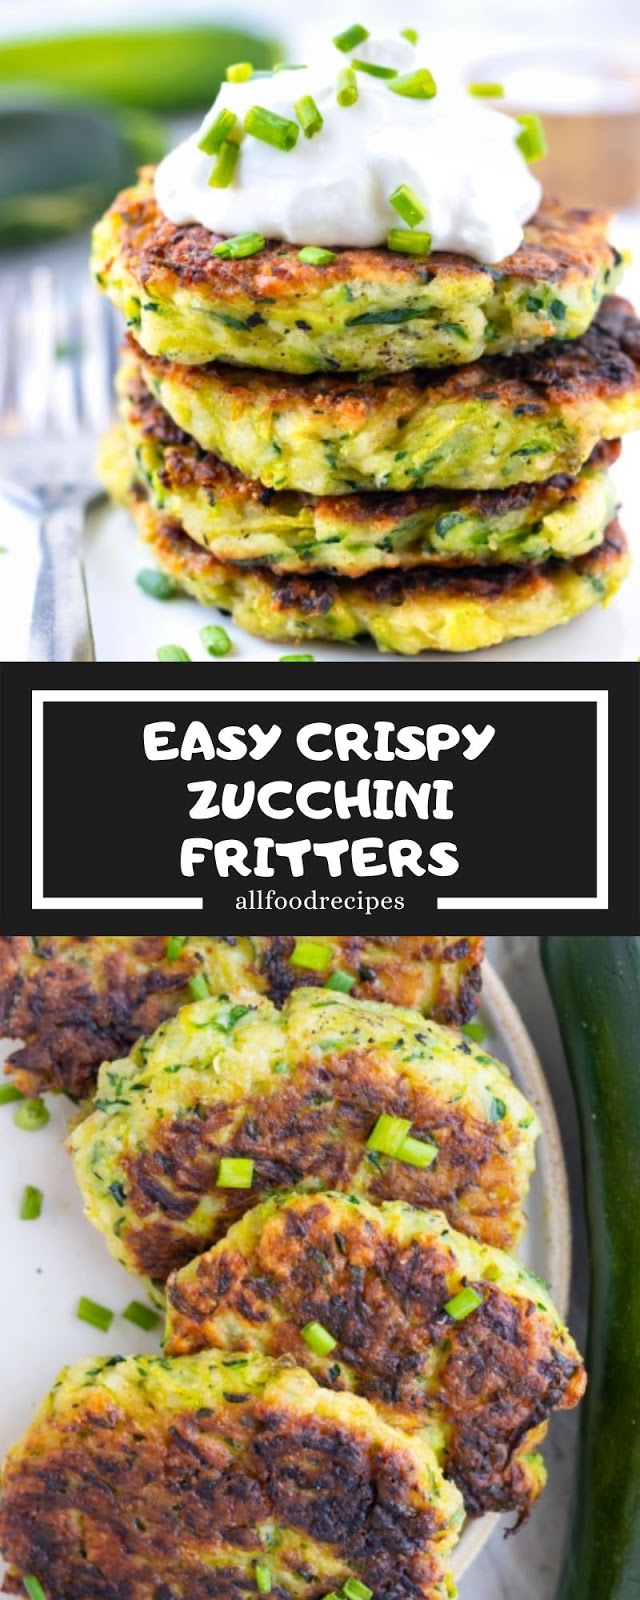 EASY CRISPY ZUCCHINI FRITTERS - All food recipes